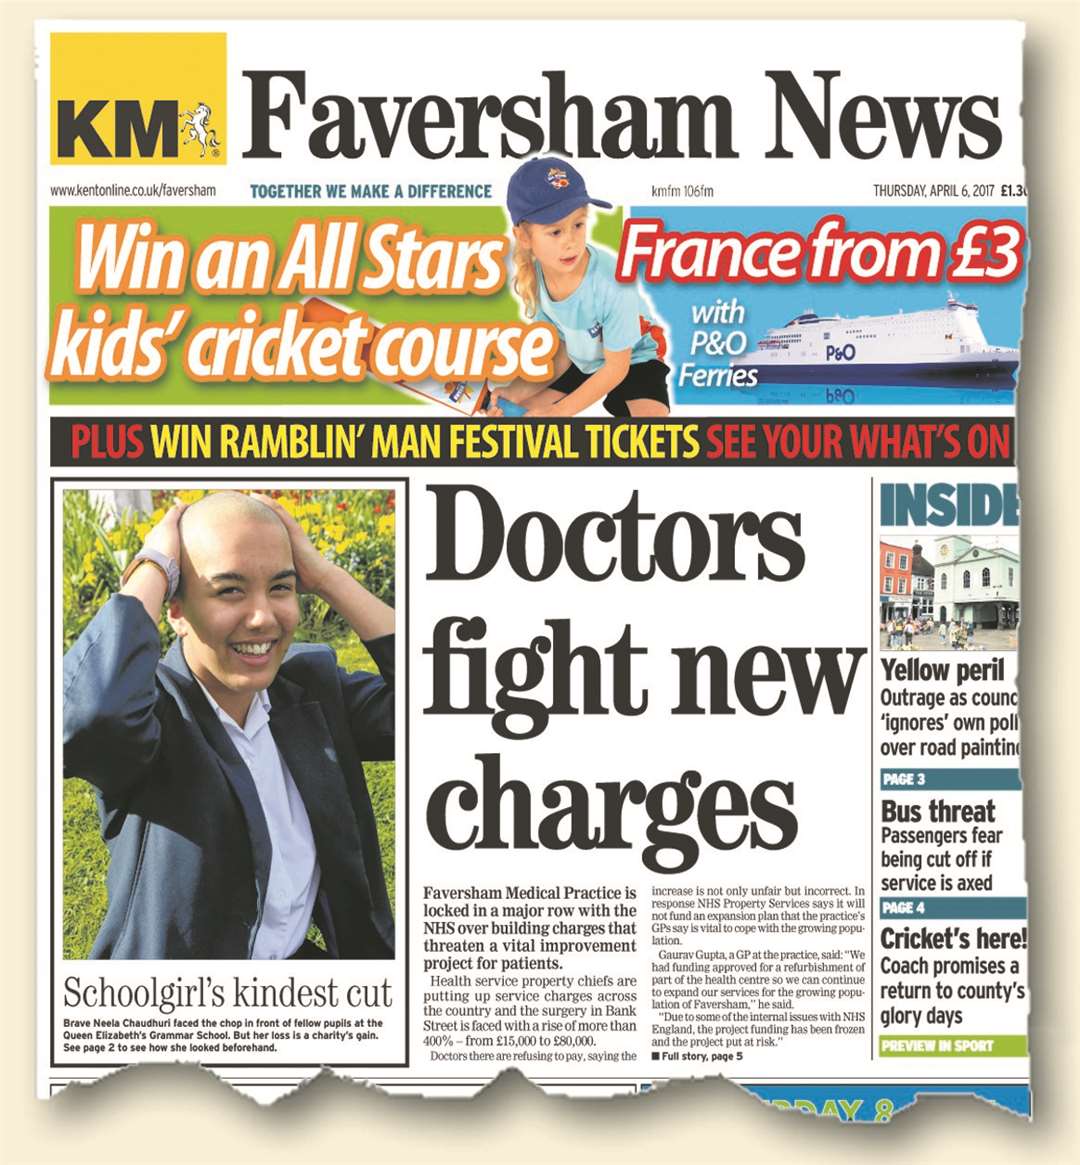 The Faversham News front page when the dispute was revealed.